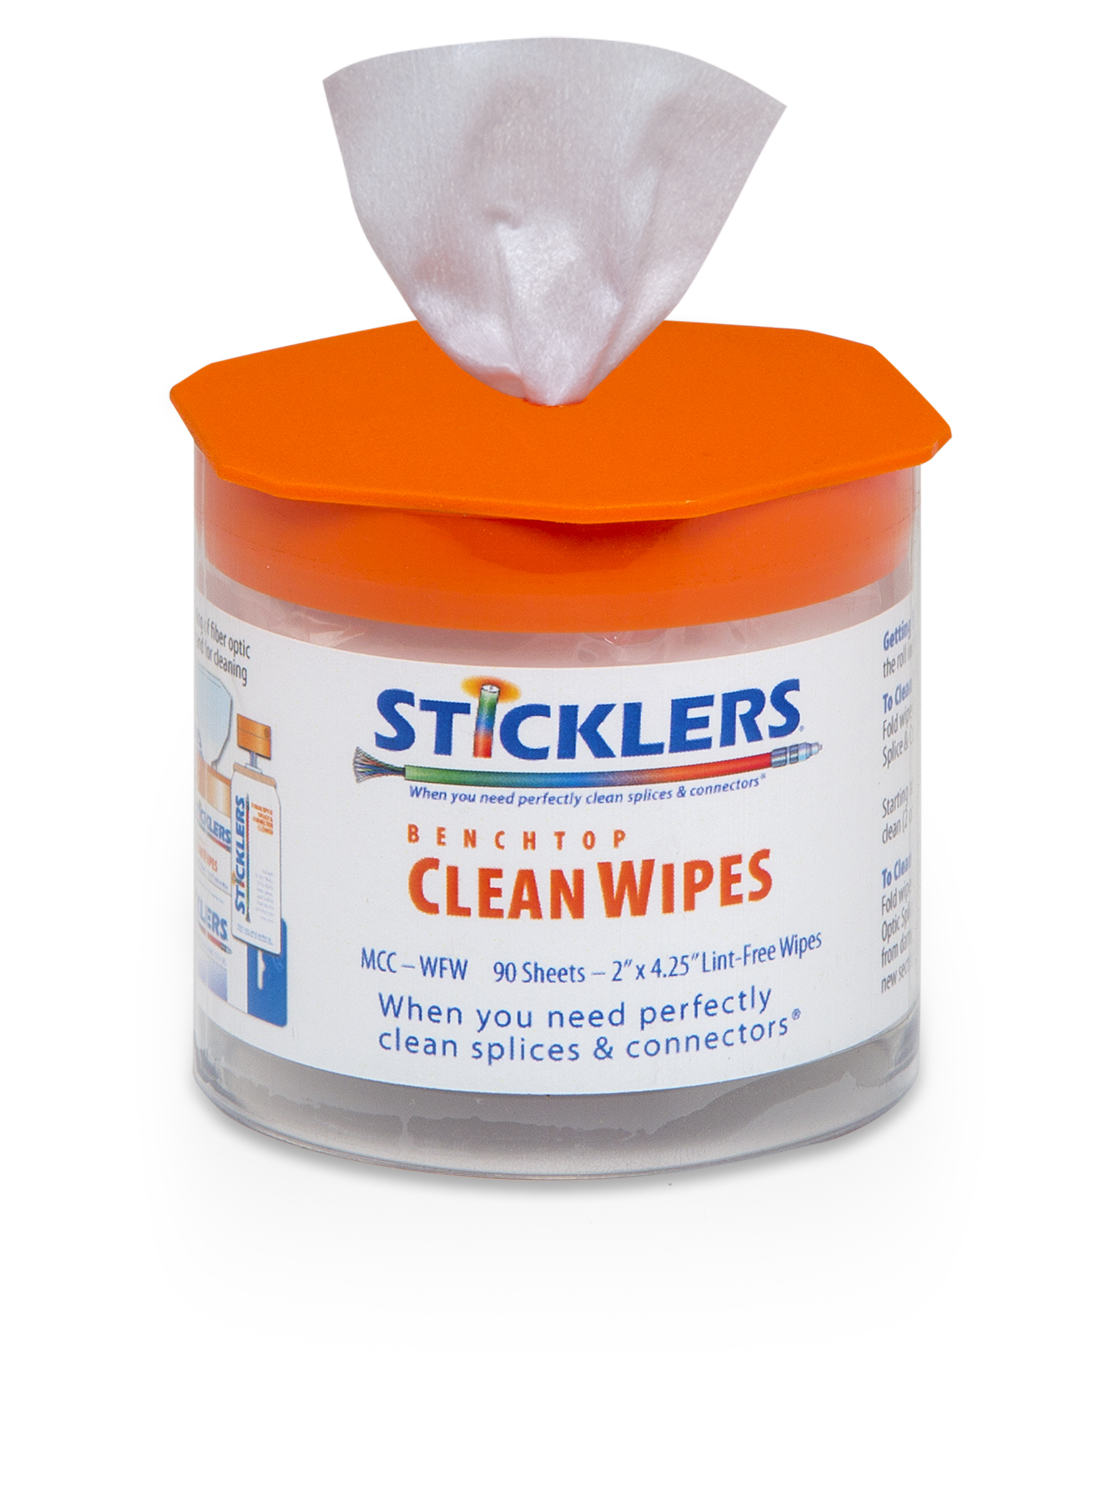 STICKLERS CLEANWIPES 90 